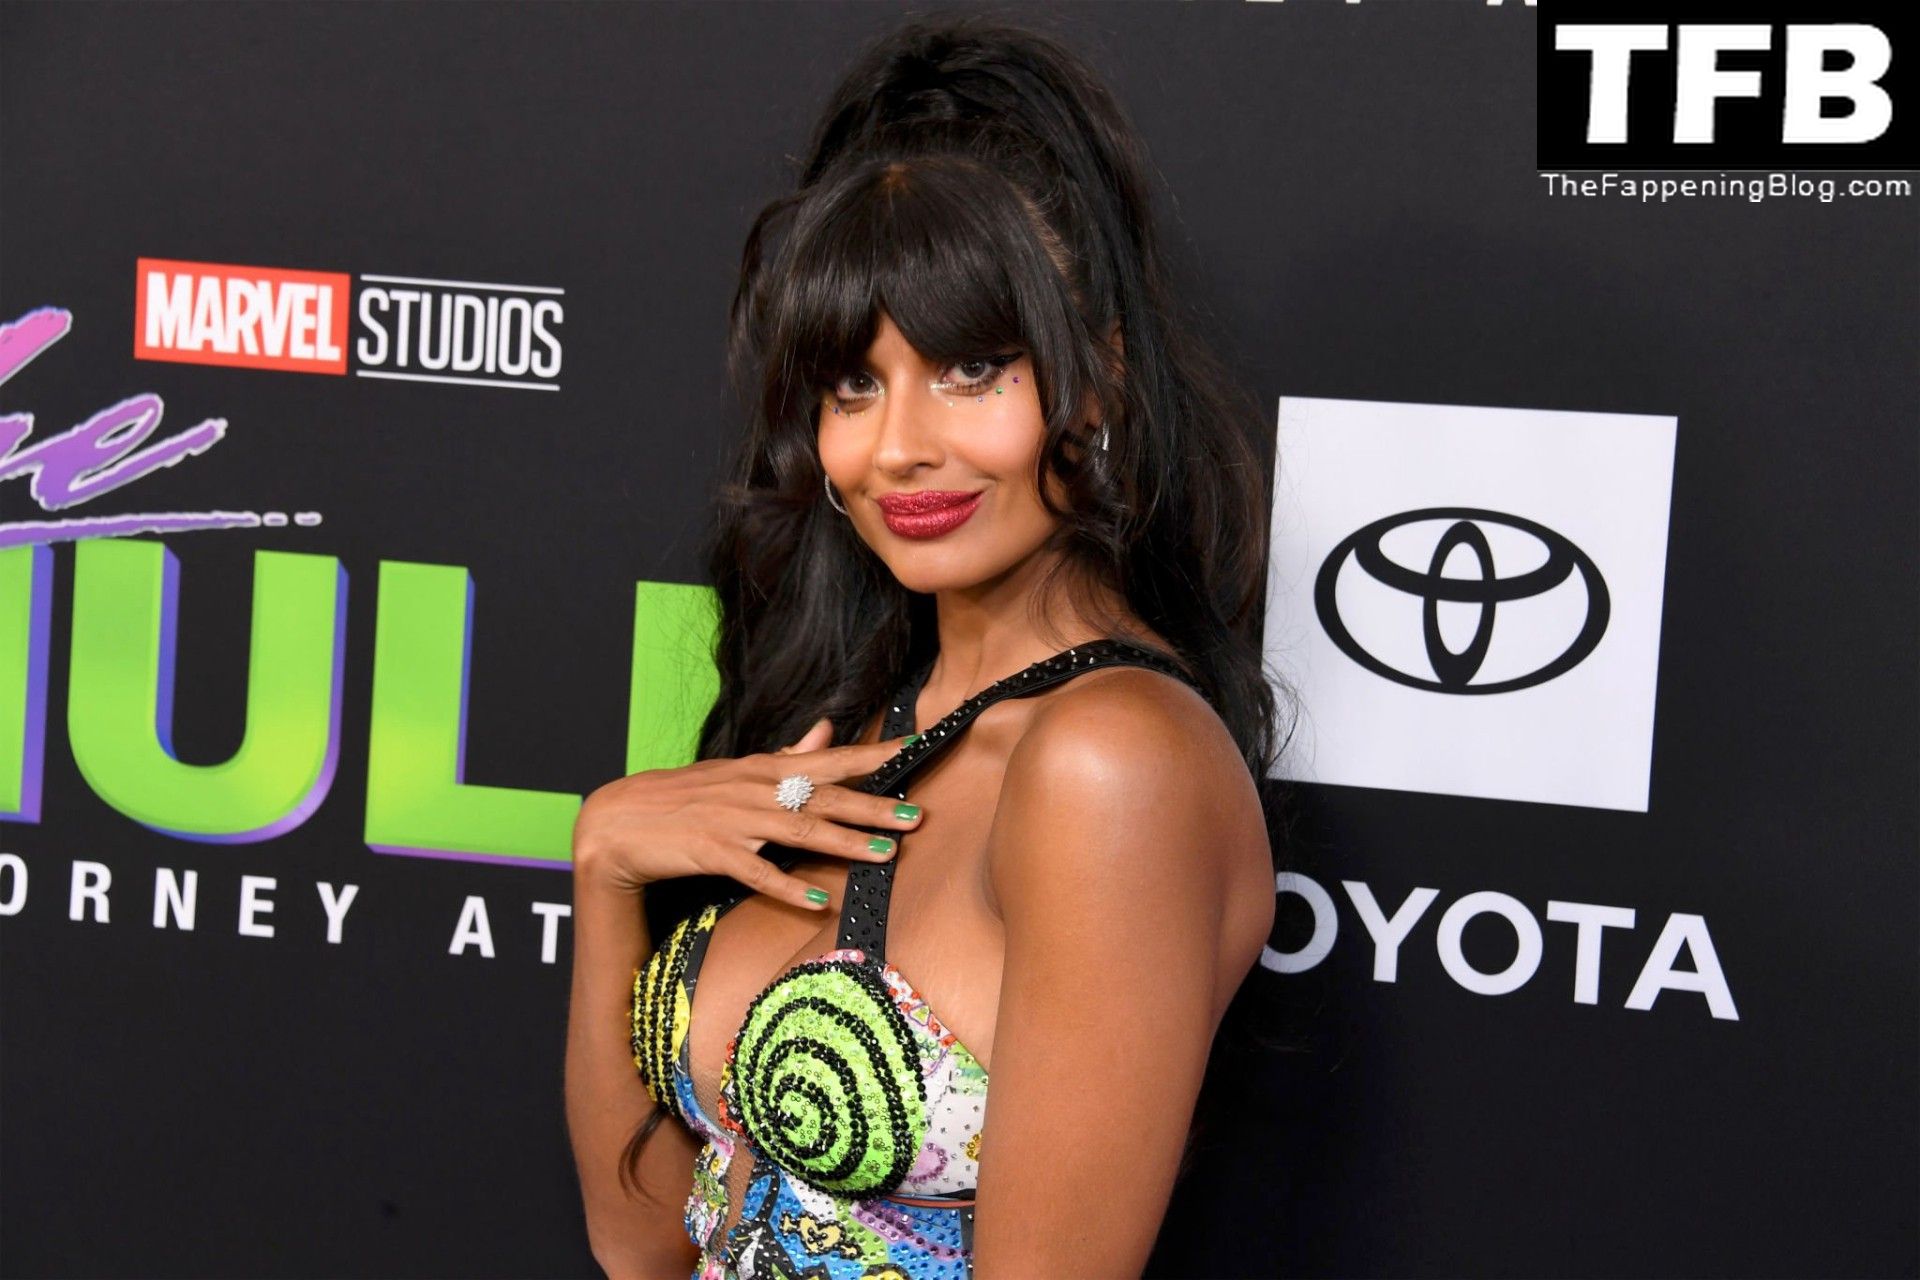 Jameela Jamil Sexy The Fappening Blog 43 - Jameela Jamil Flaunts Her Big Tits at the Premiere of Disney+’s “She Hulk: Attorney at Law” in LA (53 Photos)